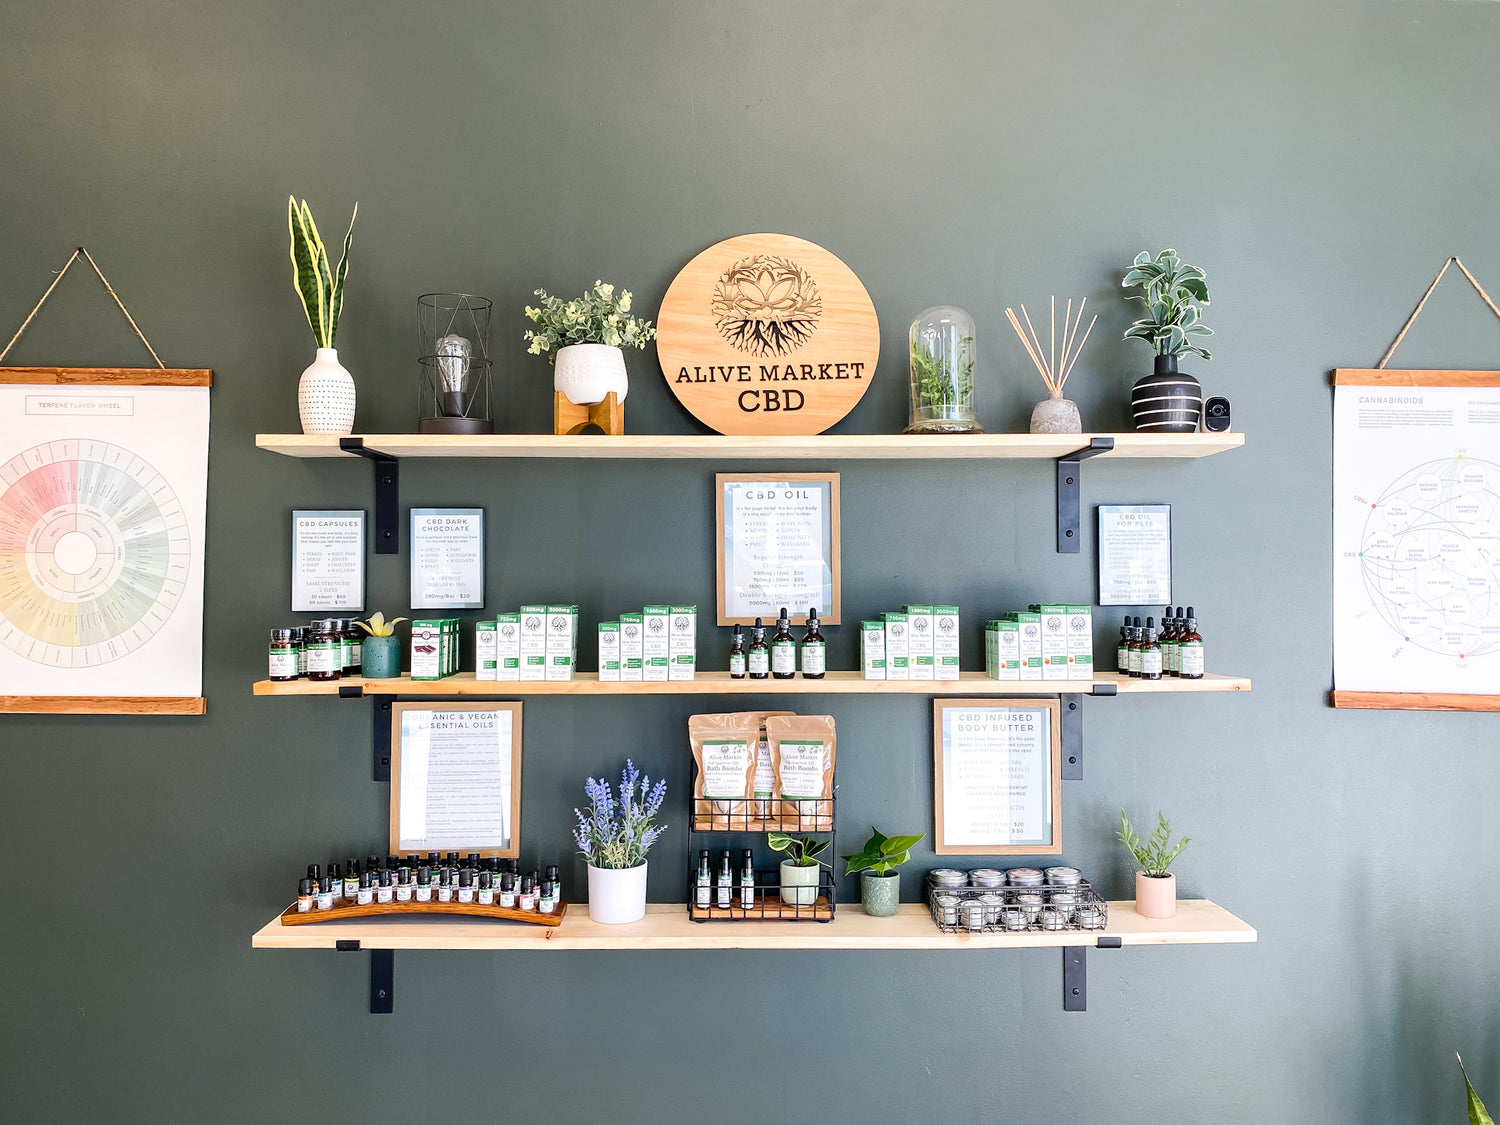 an image of display of different CBD products